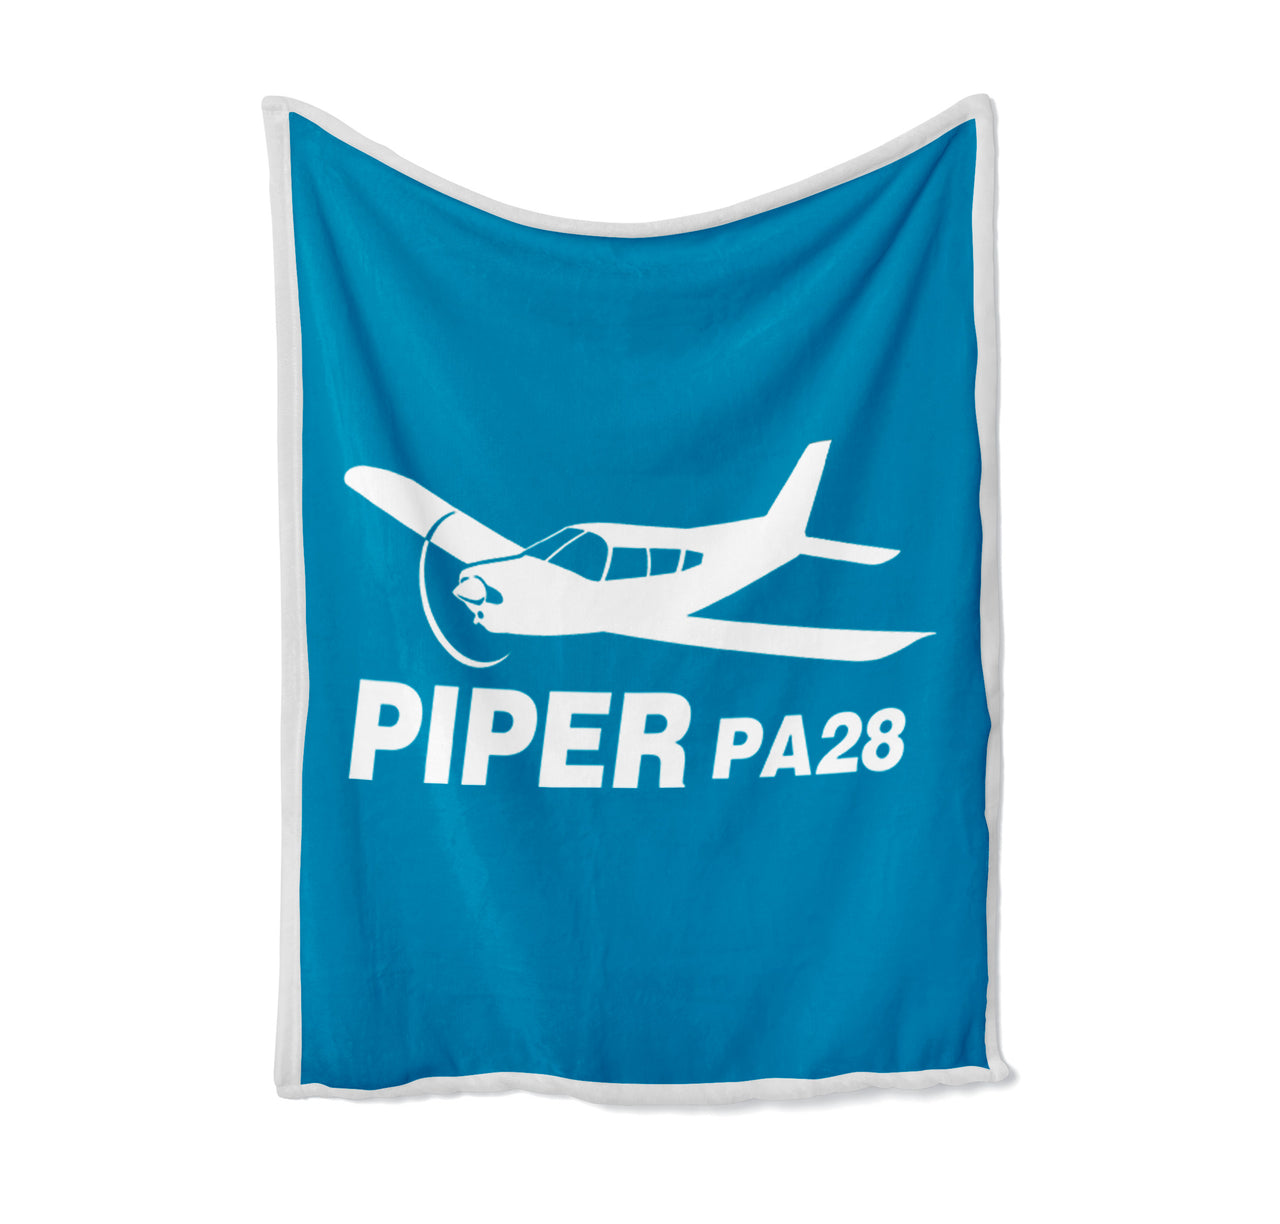 The Piper PA28 Designed Bed Blankets & Covers